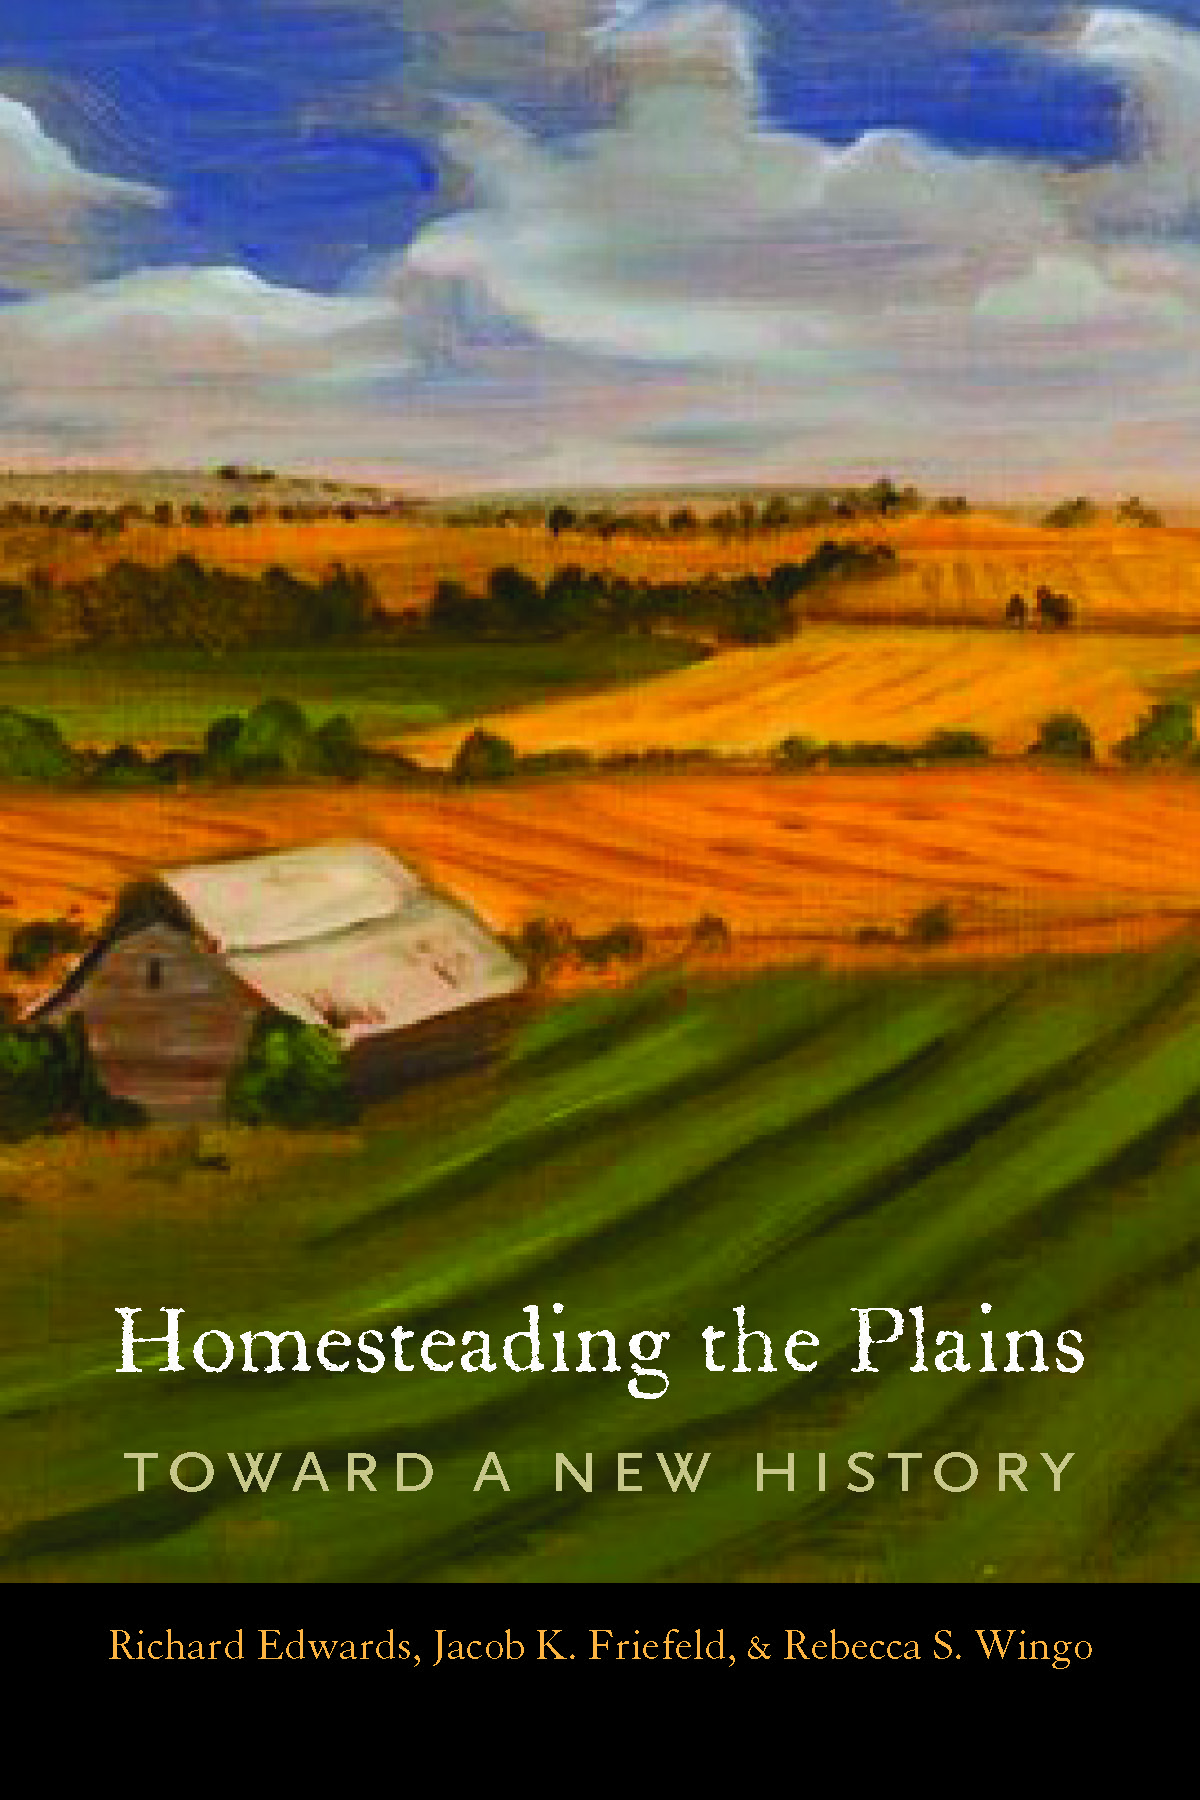 Image of the cover of Homesteading the Plains